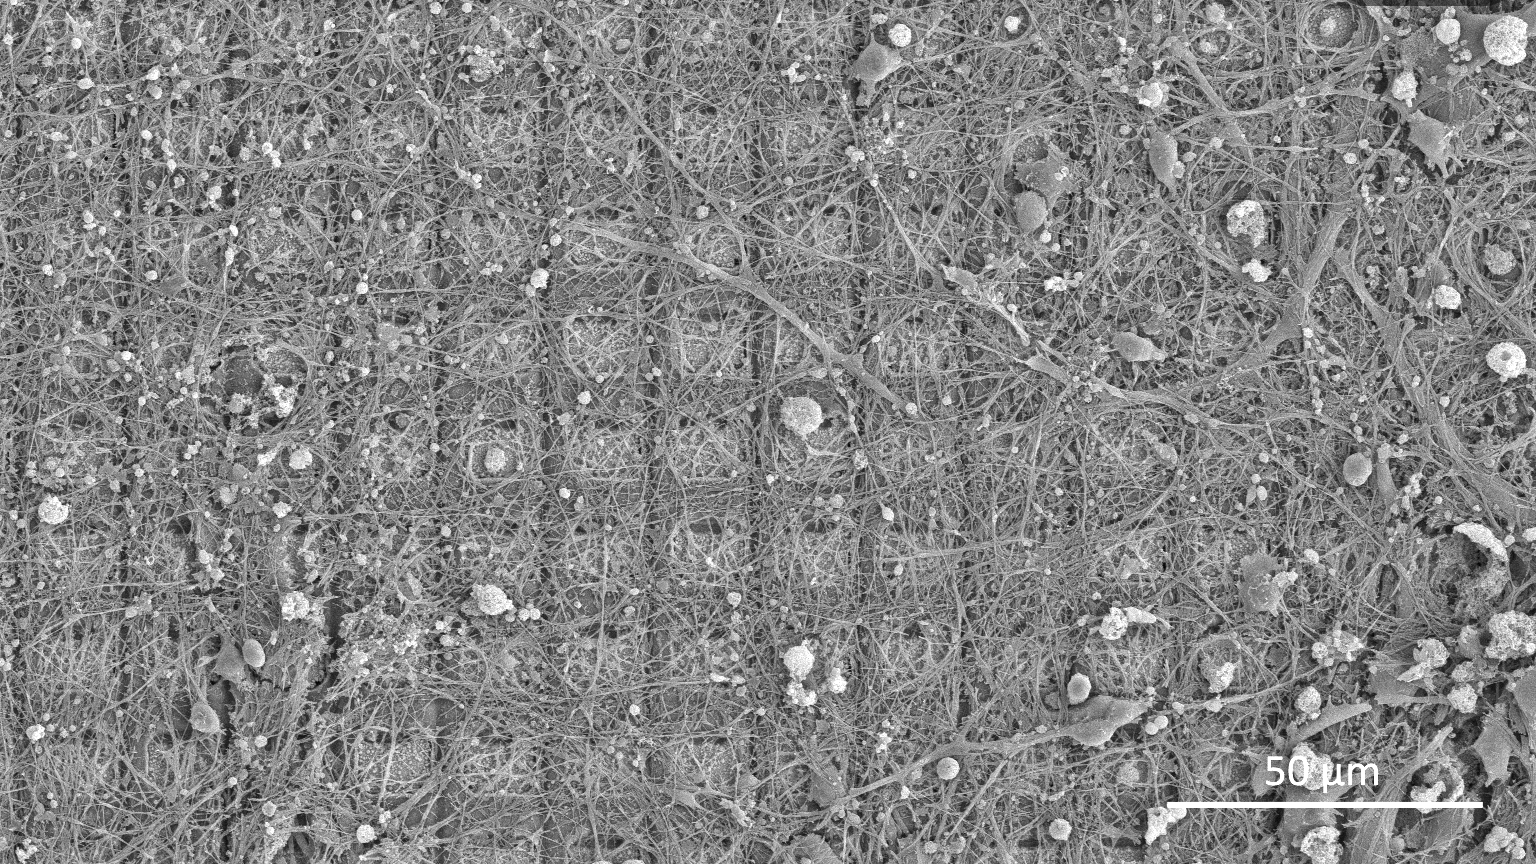 A scanning electron microscope image of the hybrid network of neurons on top of the electrode array.